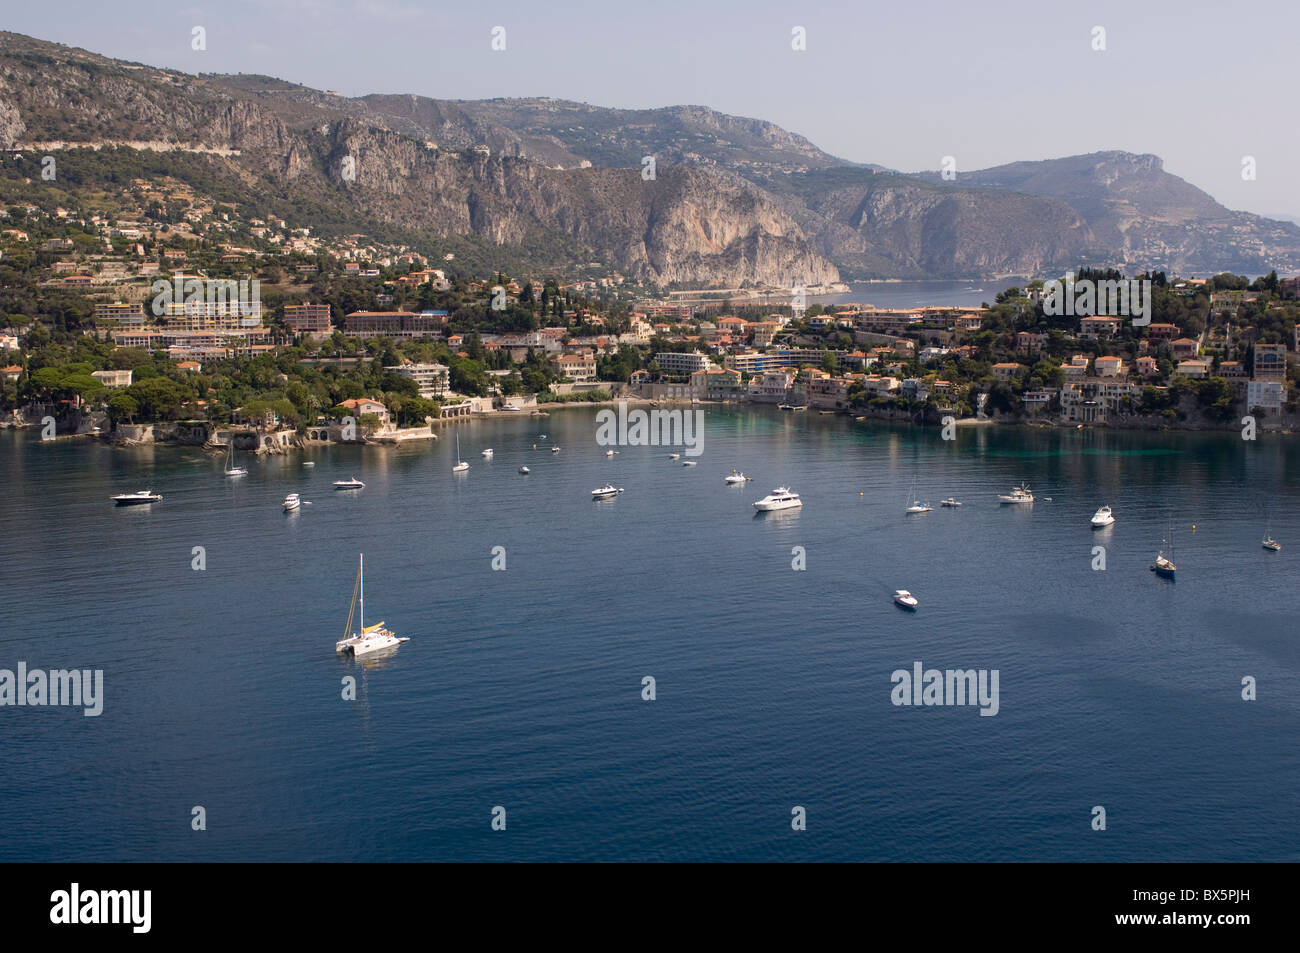 View from helicopter of Villefranche Bay, Alpes-Maritimes, Provence, Cote d'Azur, French Riviera, France, Mediterranean, Europe Stock Photo